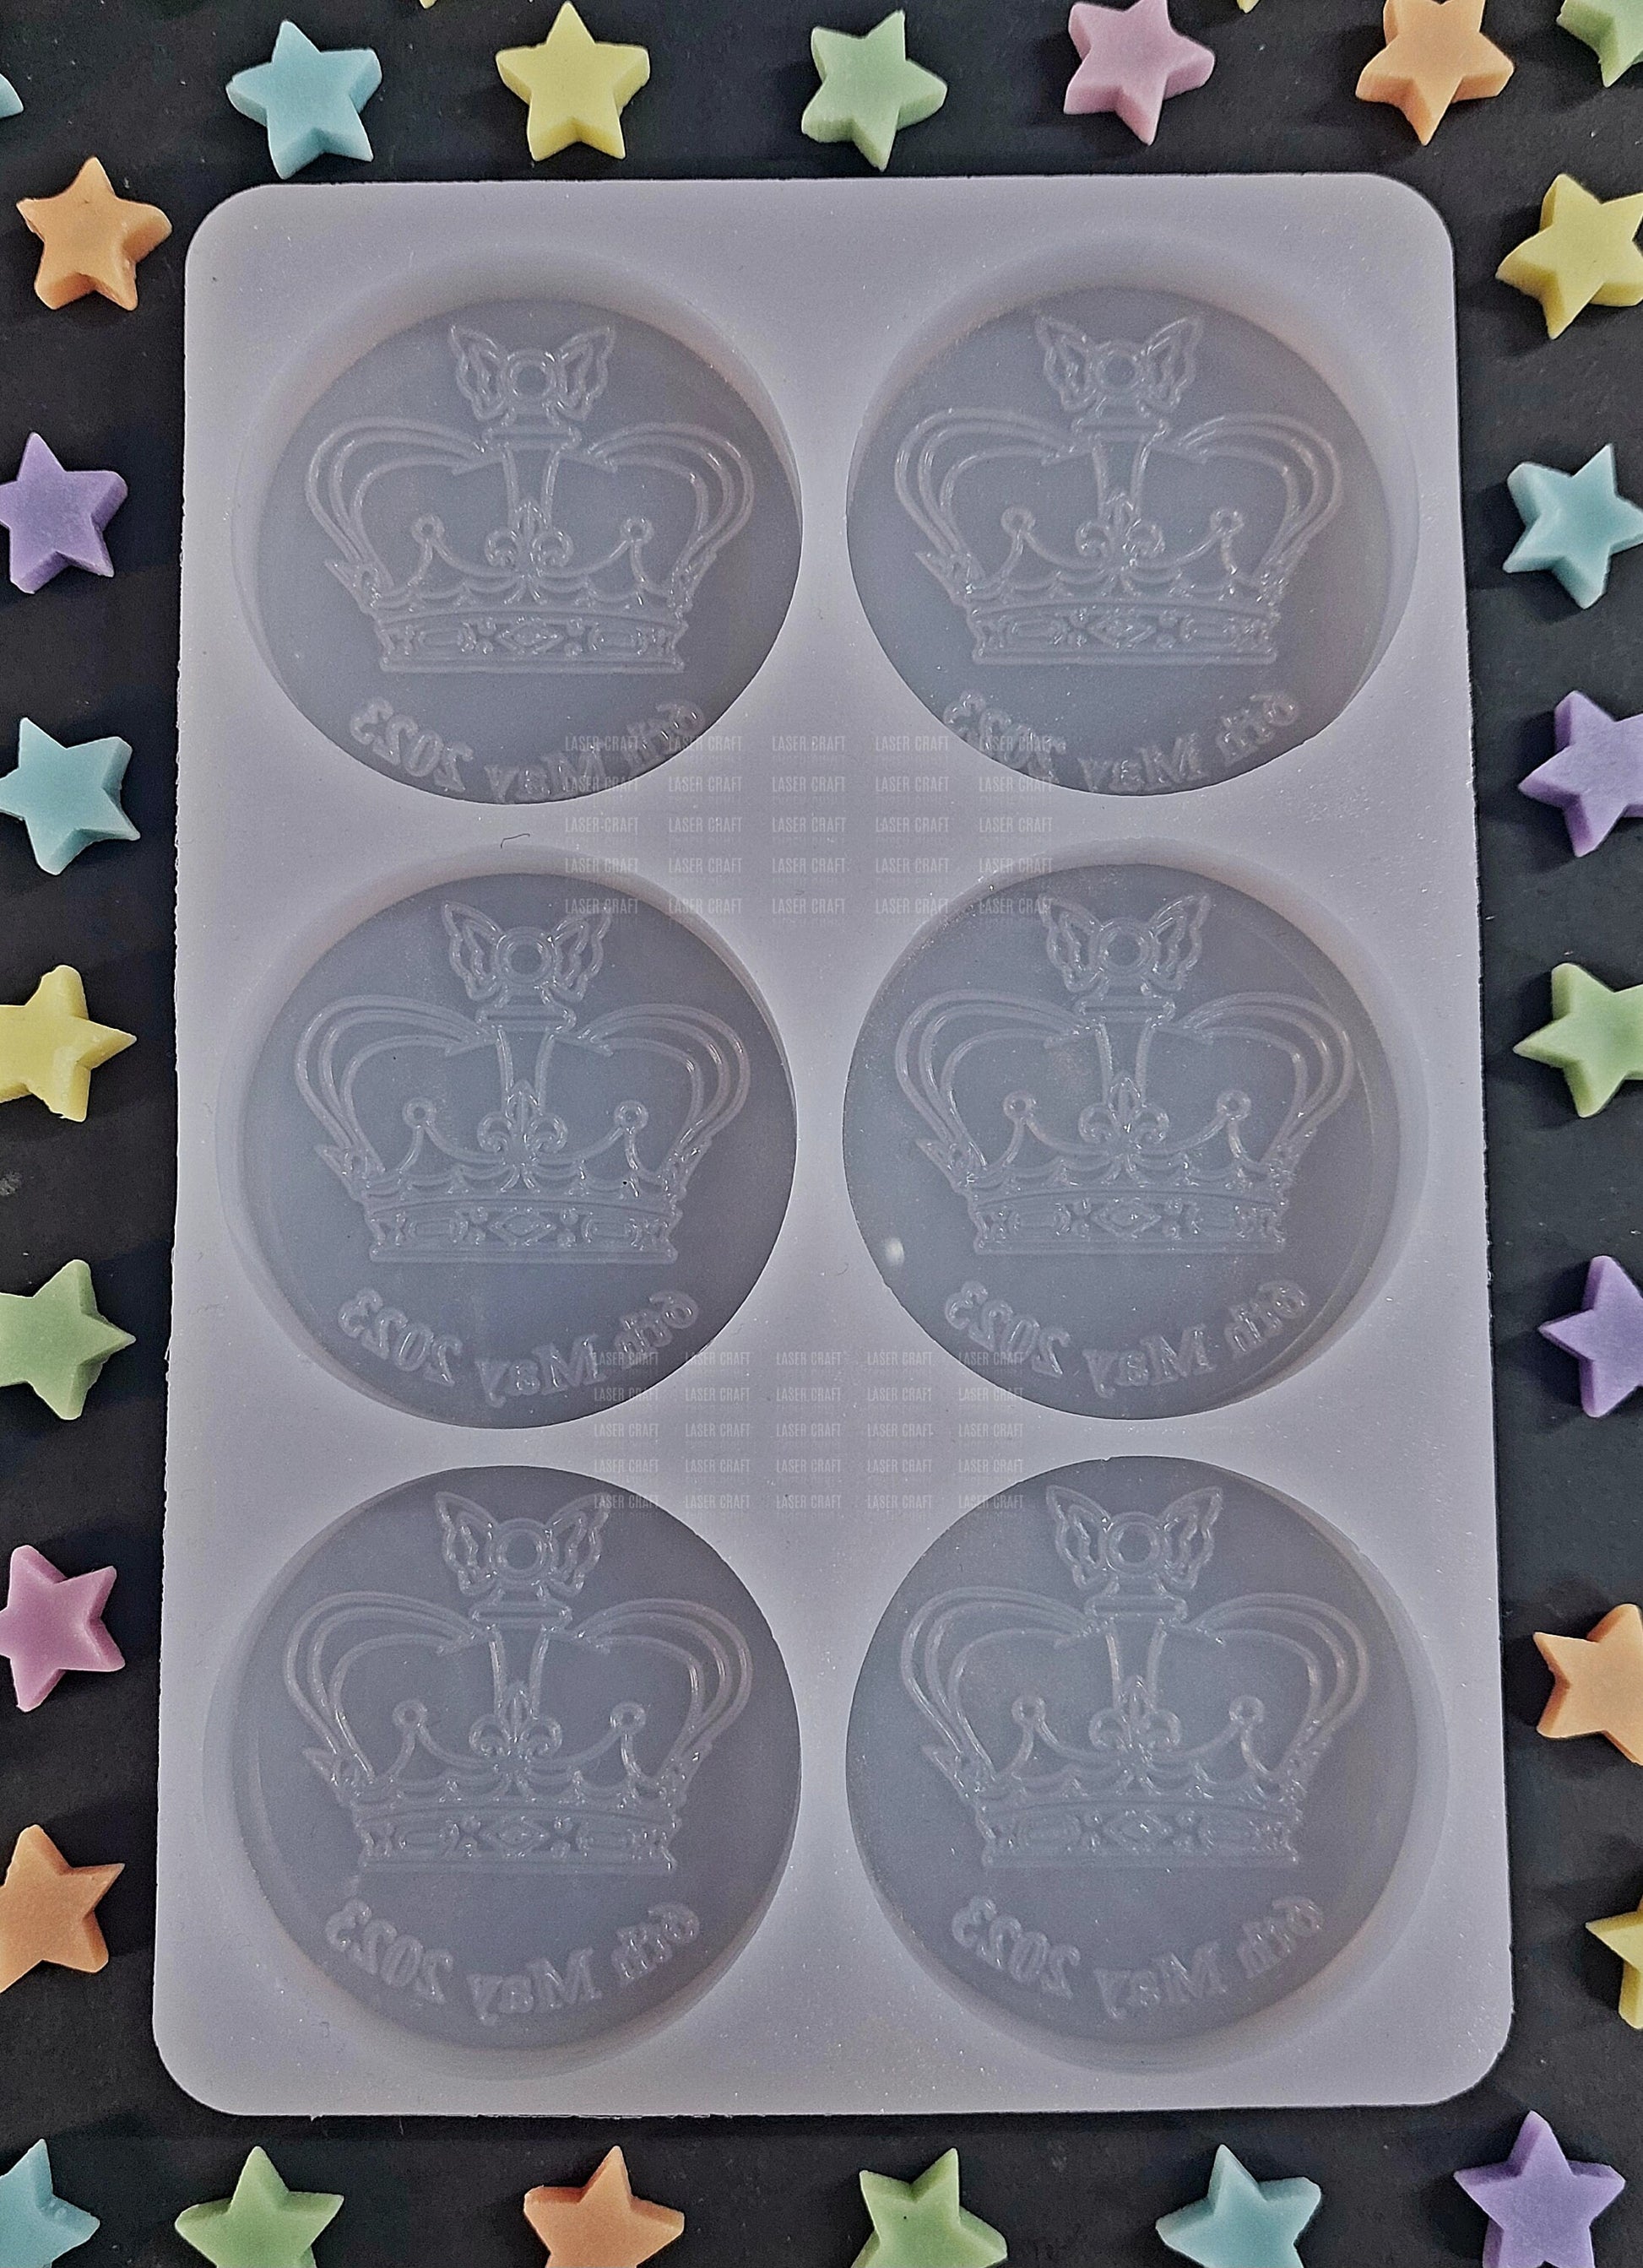 King Coronation 6 Cell Disc Mould for wax, resin, jesmonite etc